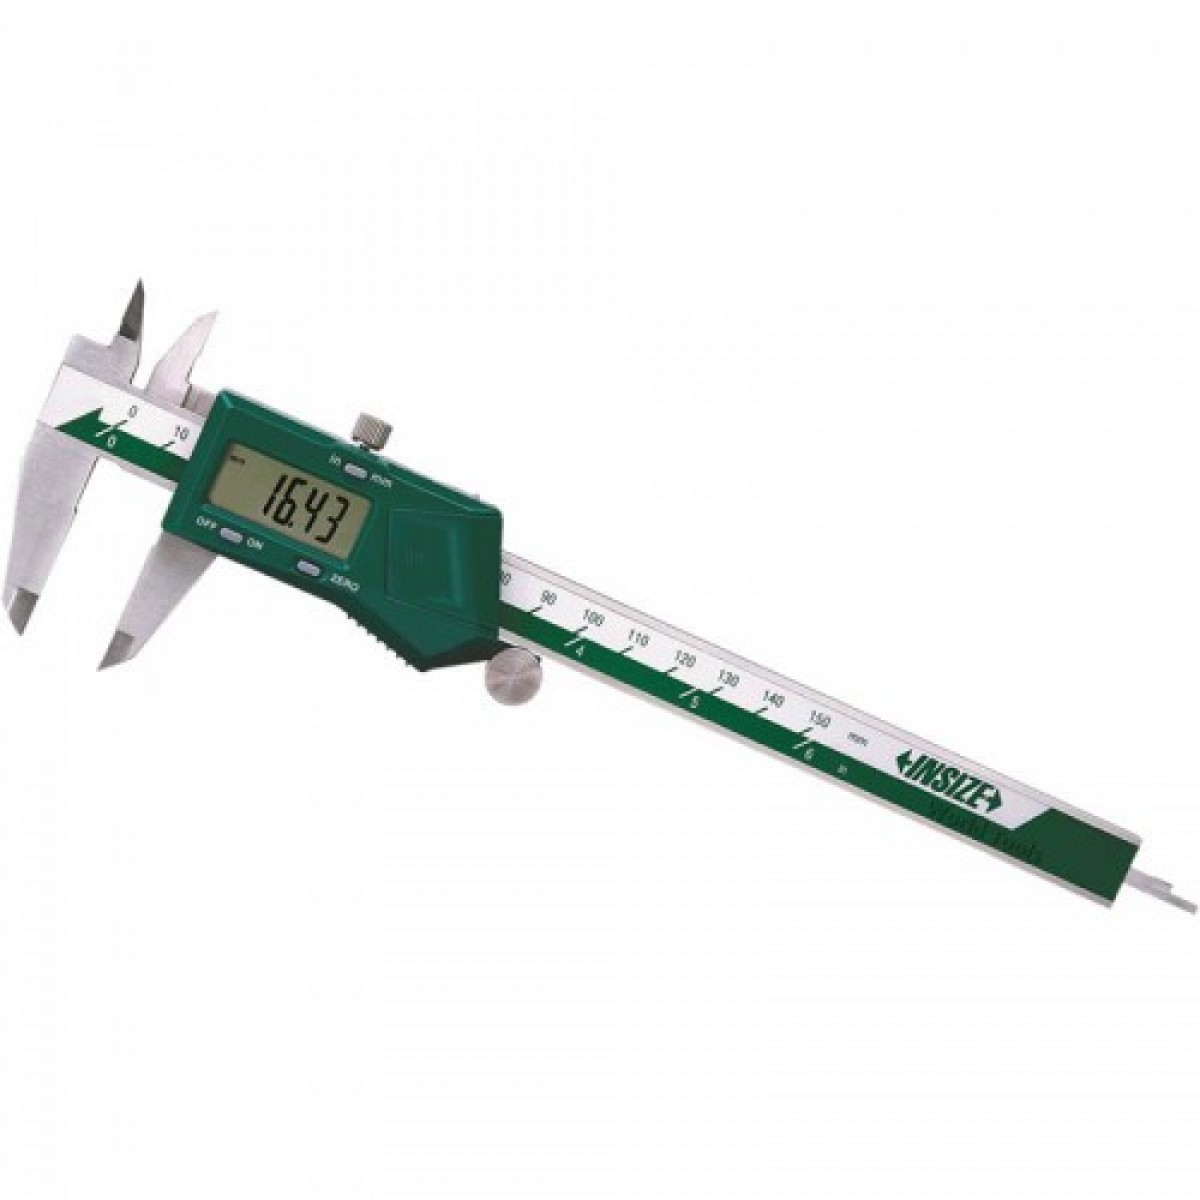 INSIZE 1108-300 ELECTRONIC CALIPER 300mm/12" - Click Image to Close